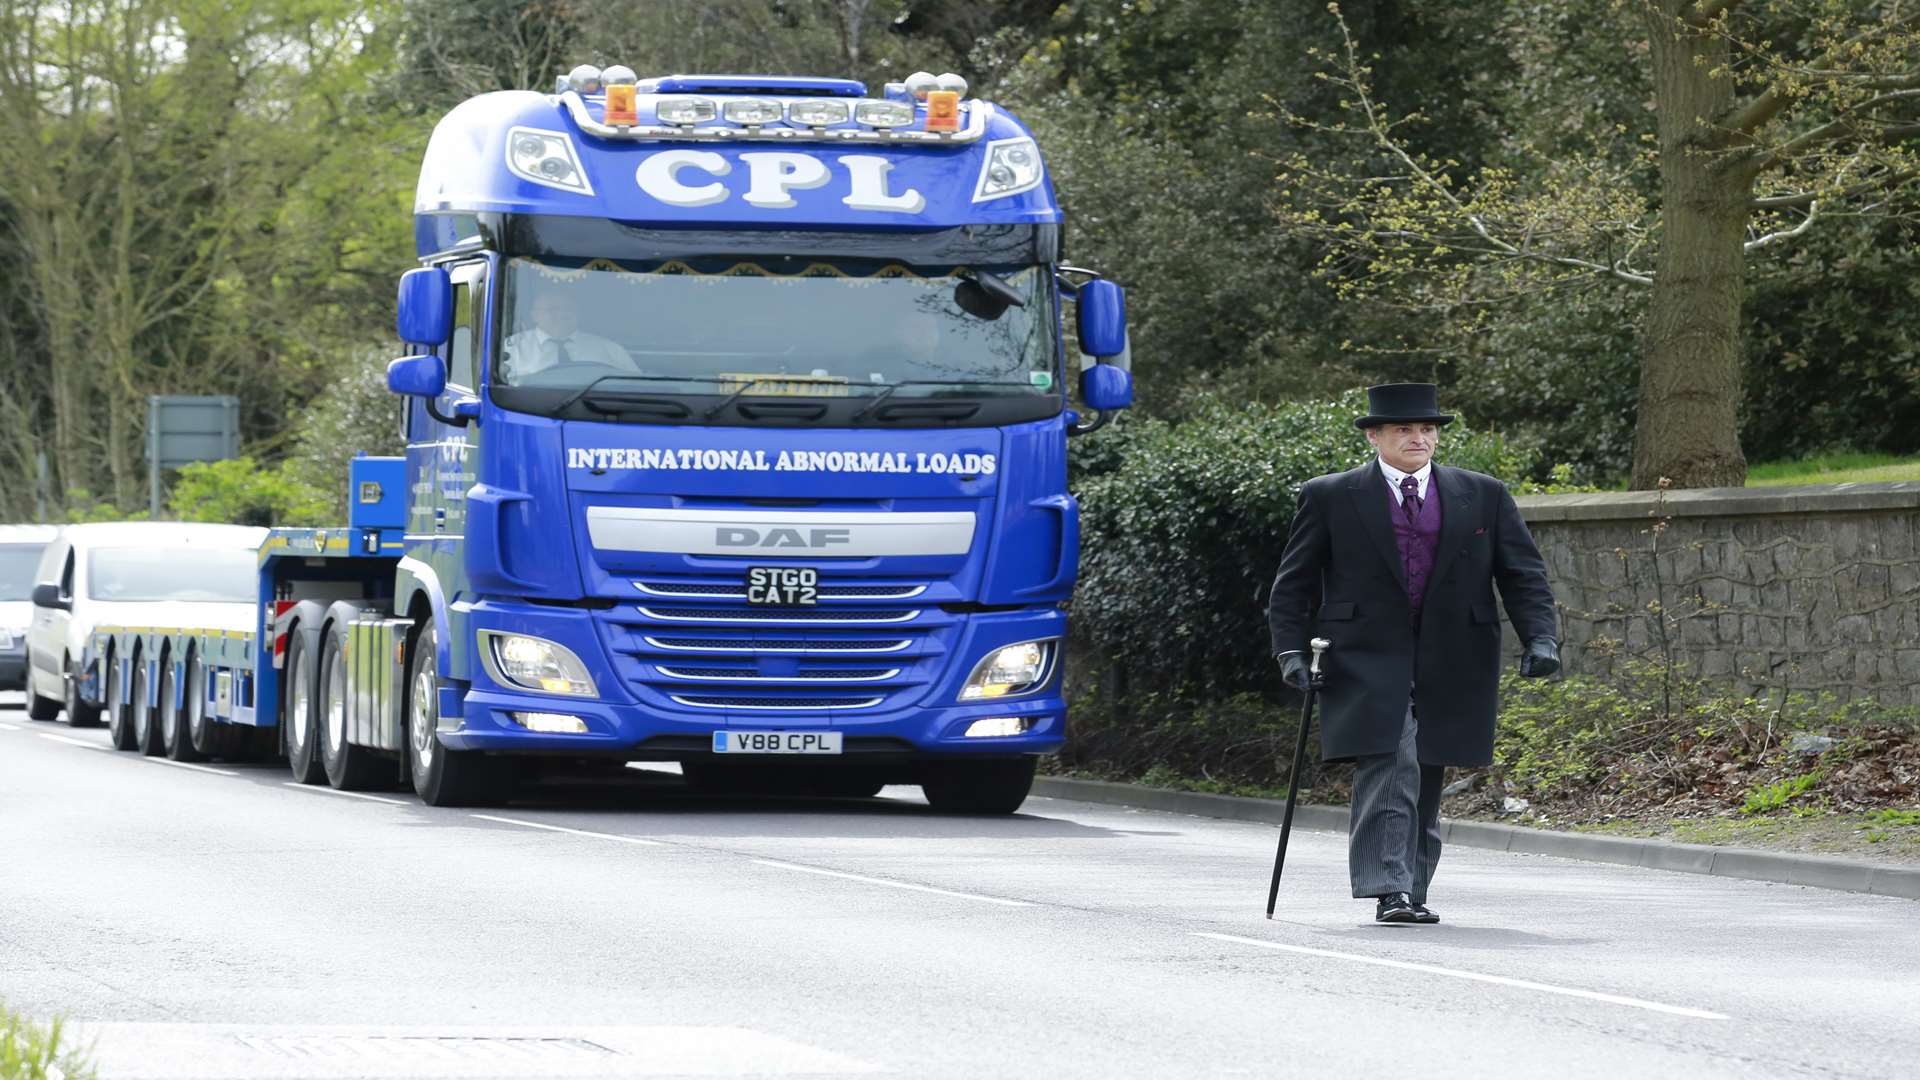 Rafael Learmonth from Angels Independent Family Funerals walks in front of the lorry. Picture: Martin Apps